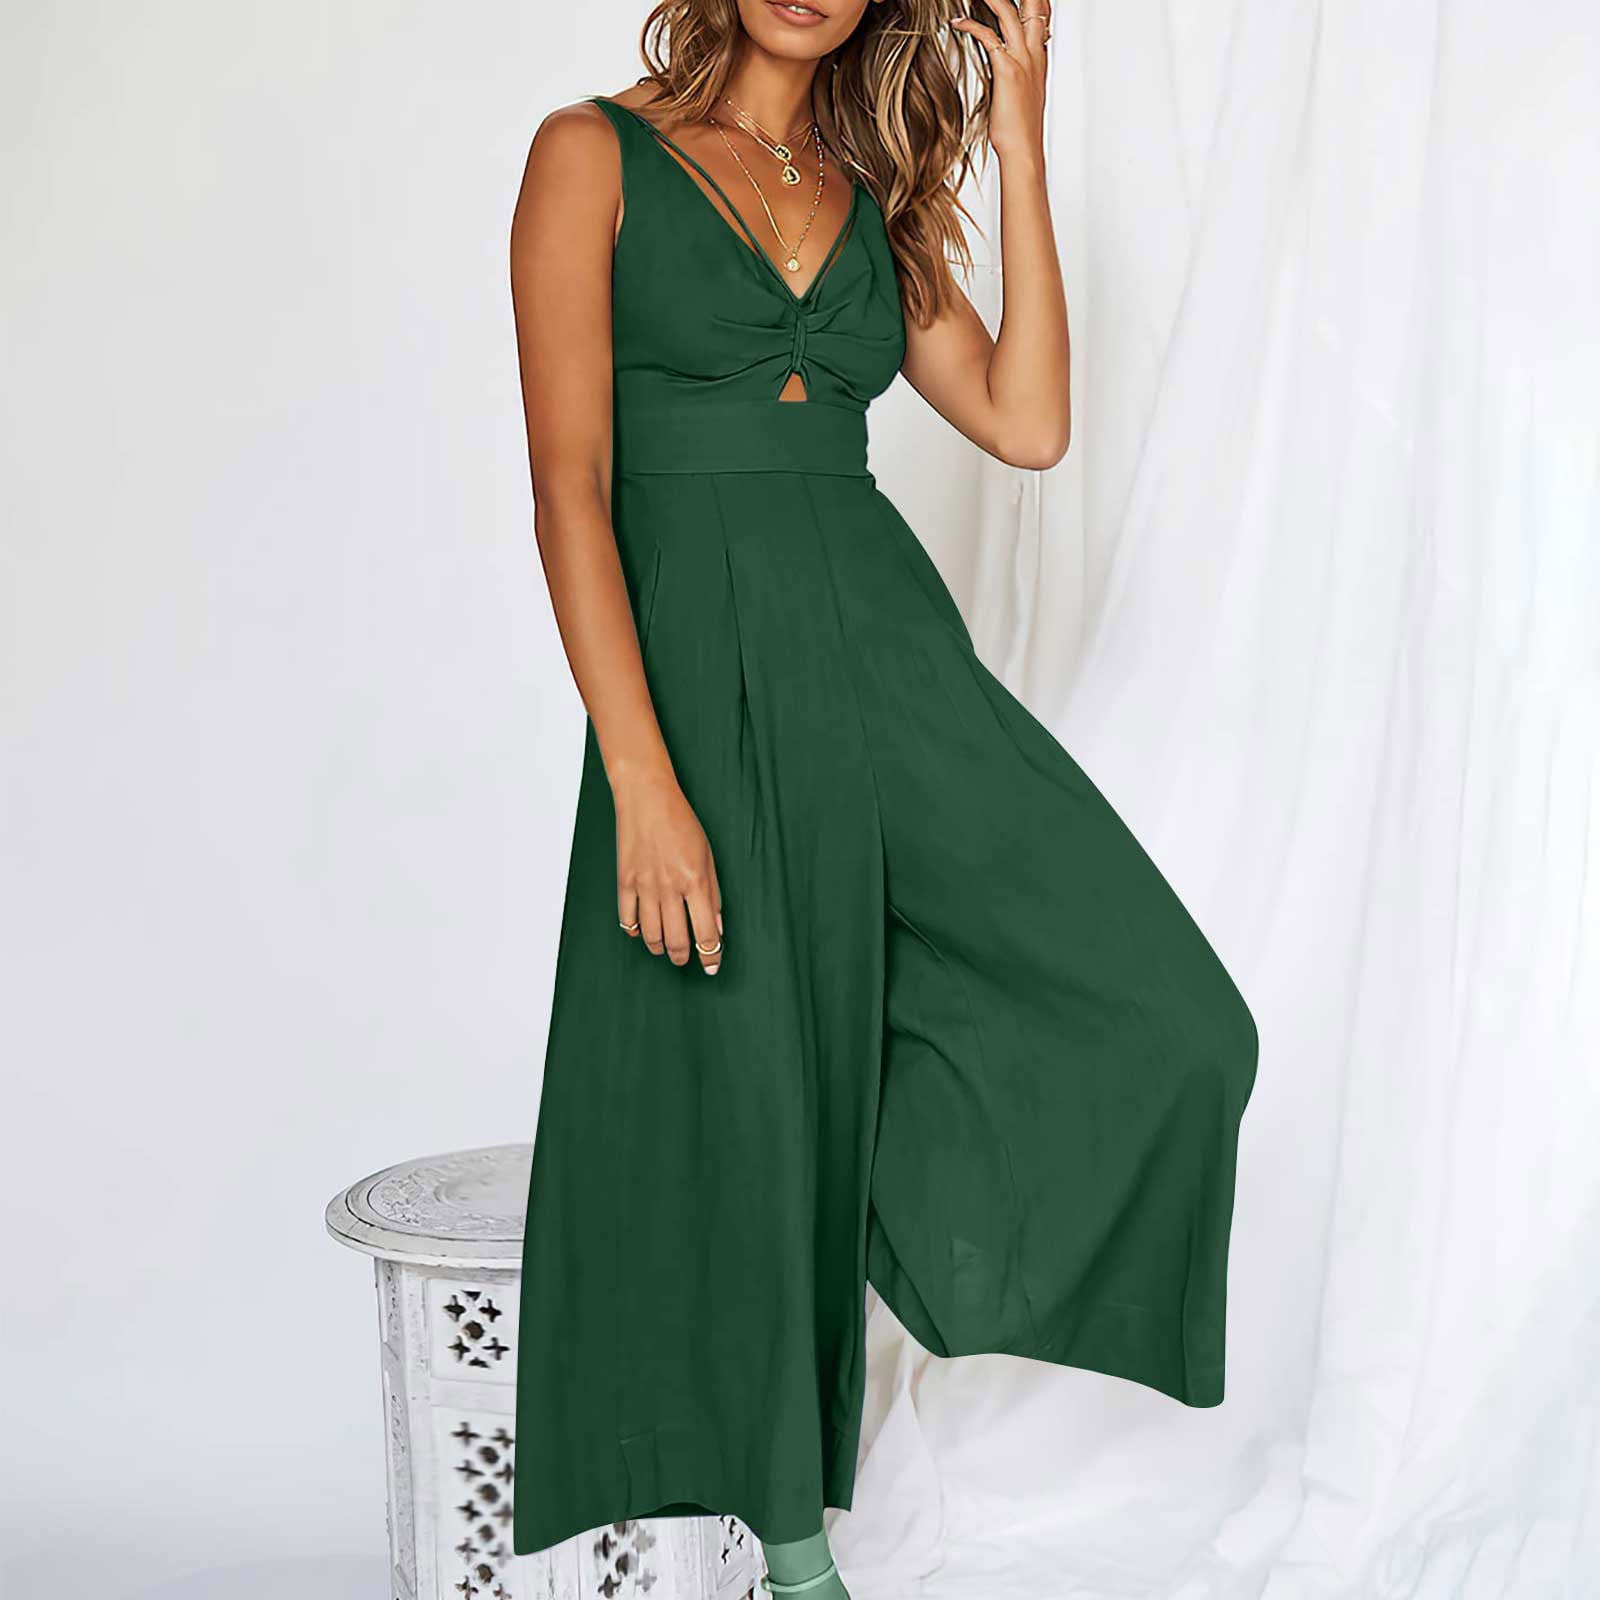 Levmjia Womens Jumpsuits and Rompers Ladies Printed Summer Sleeveless  Backless Loose Long Playsuits Rompers Jumpsuit